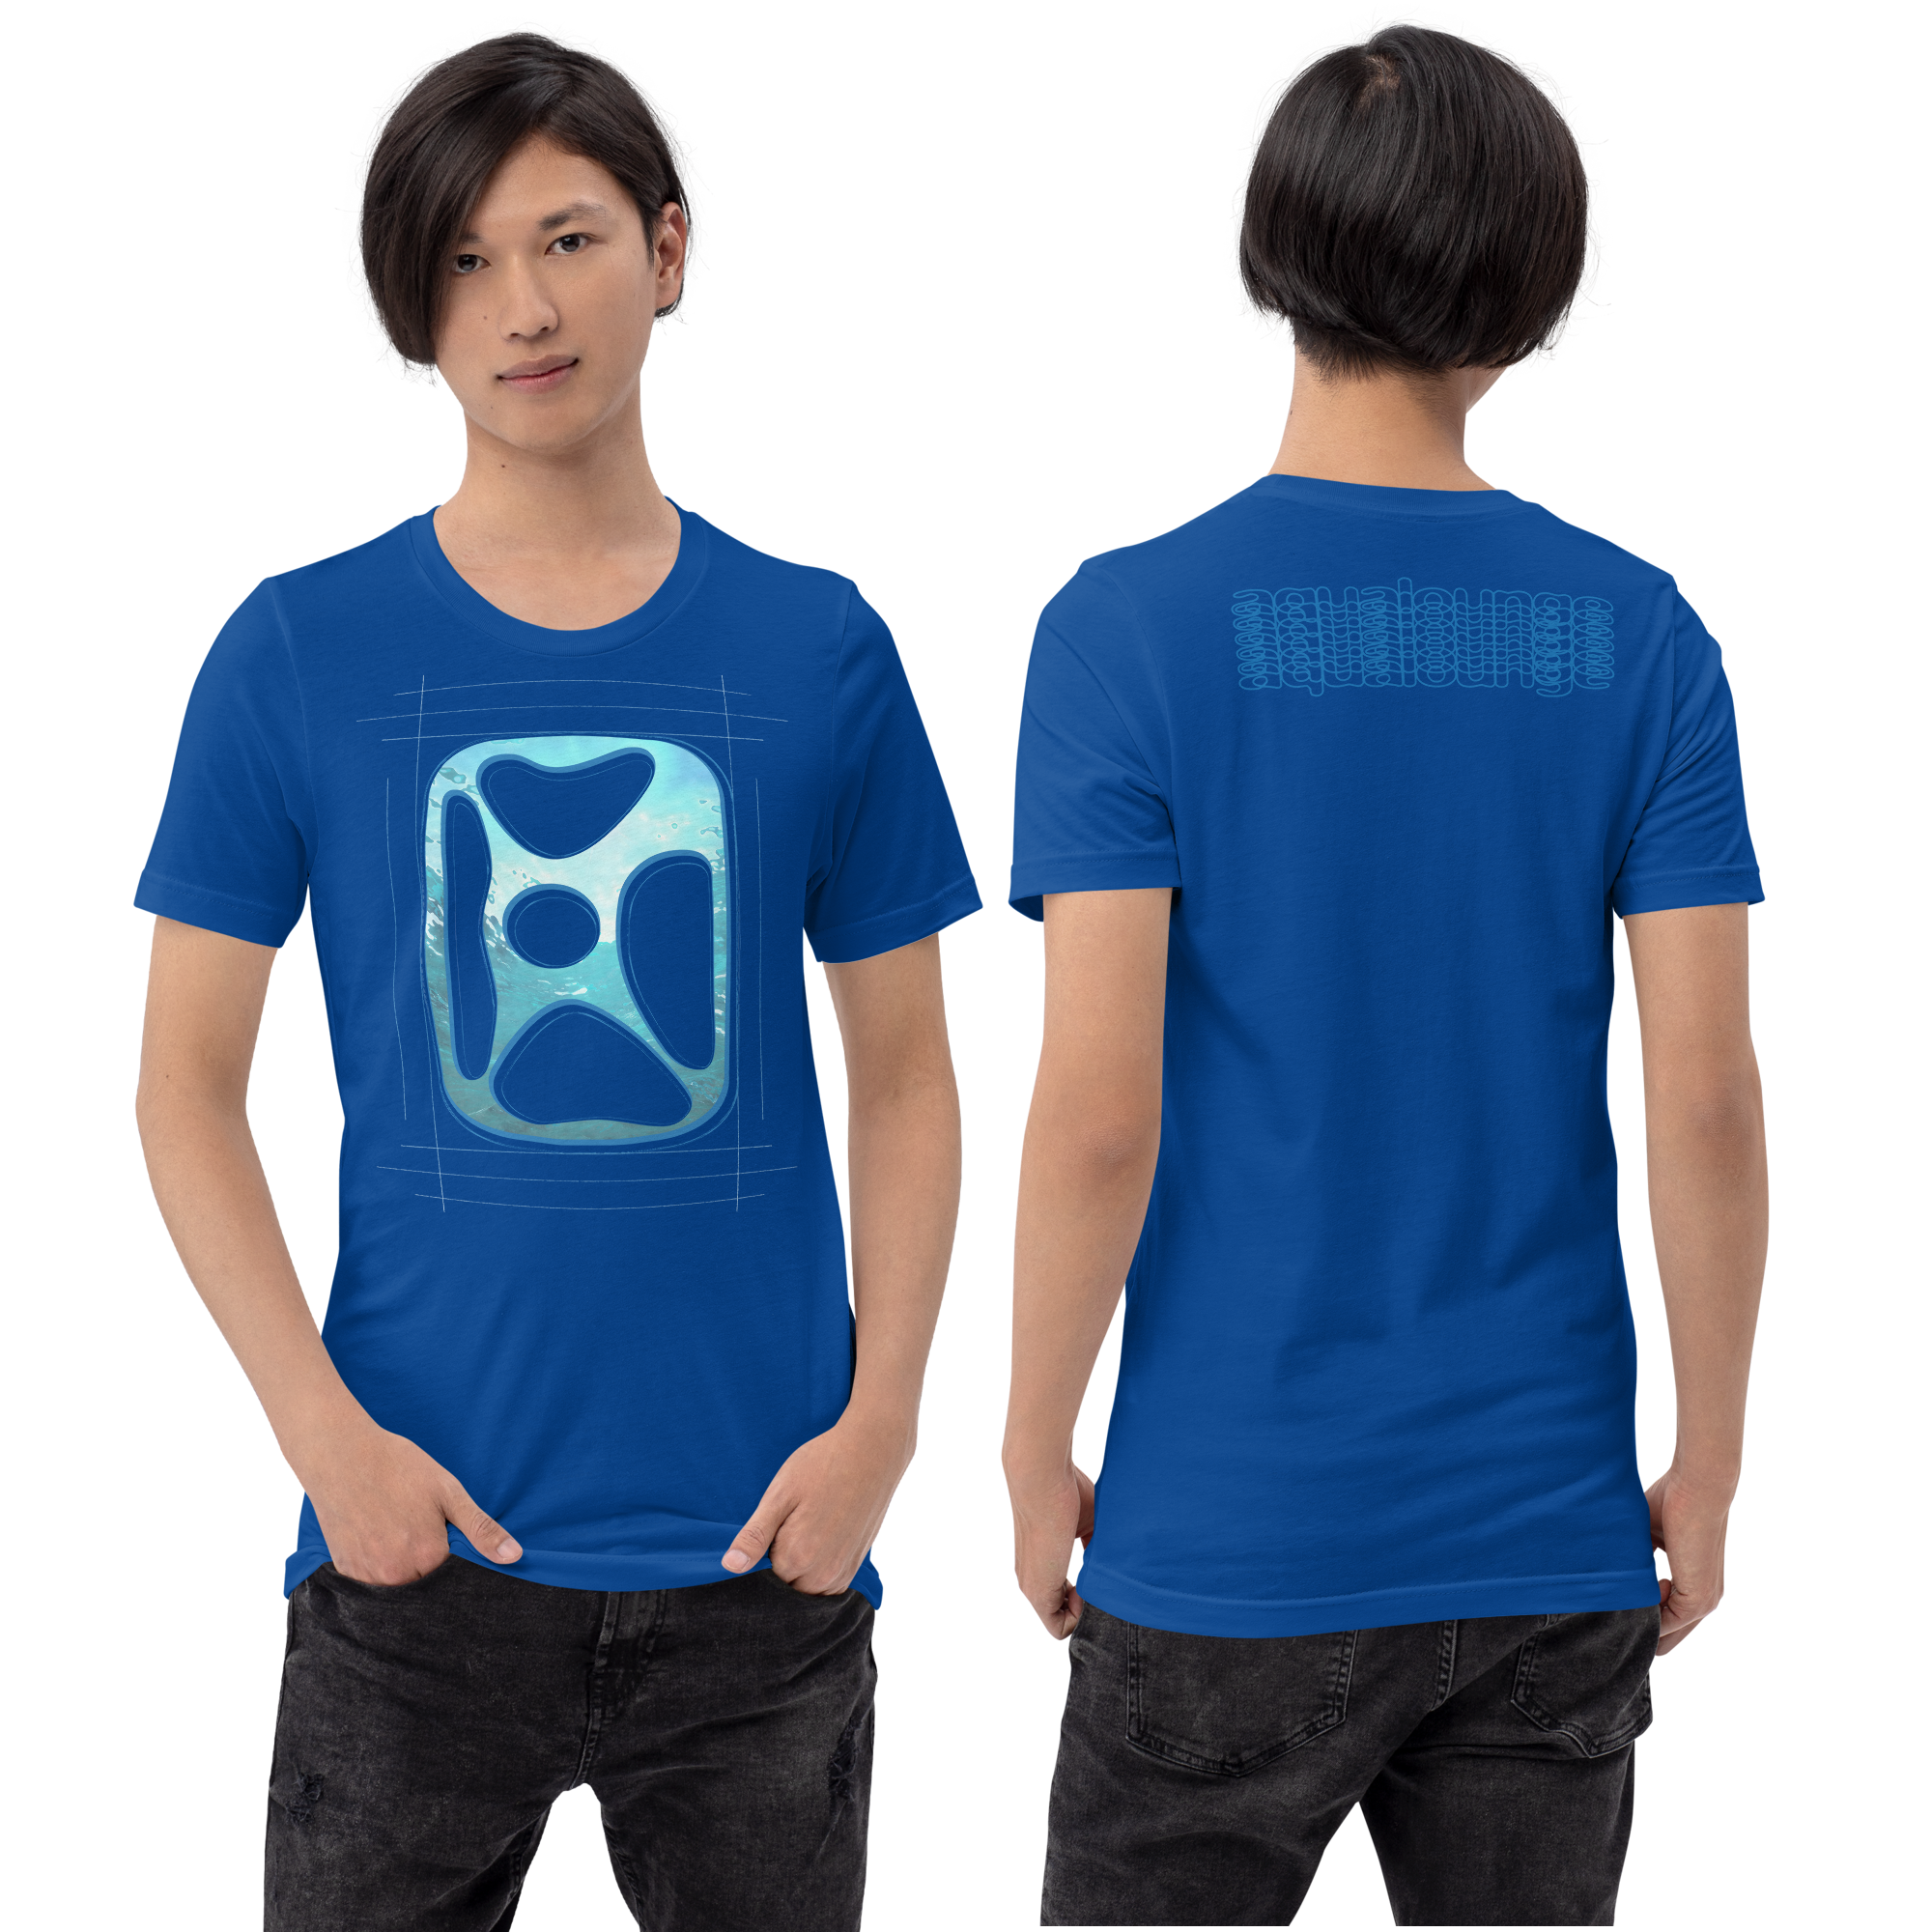 Aqua Obscura two-sided tee ($30.99)